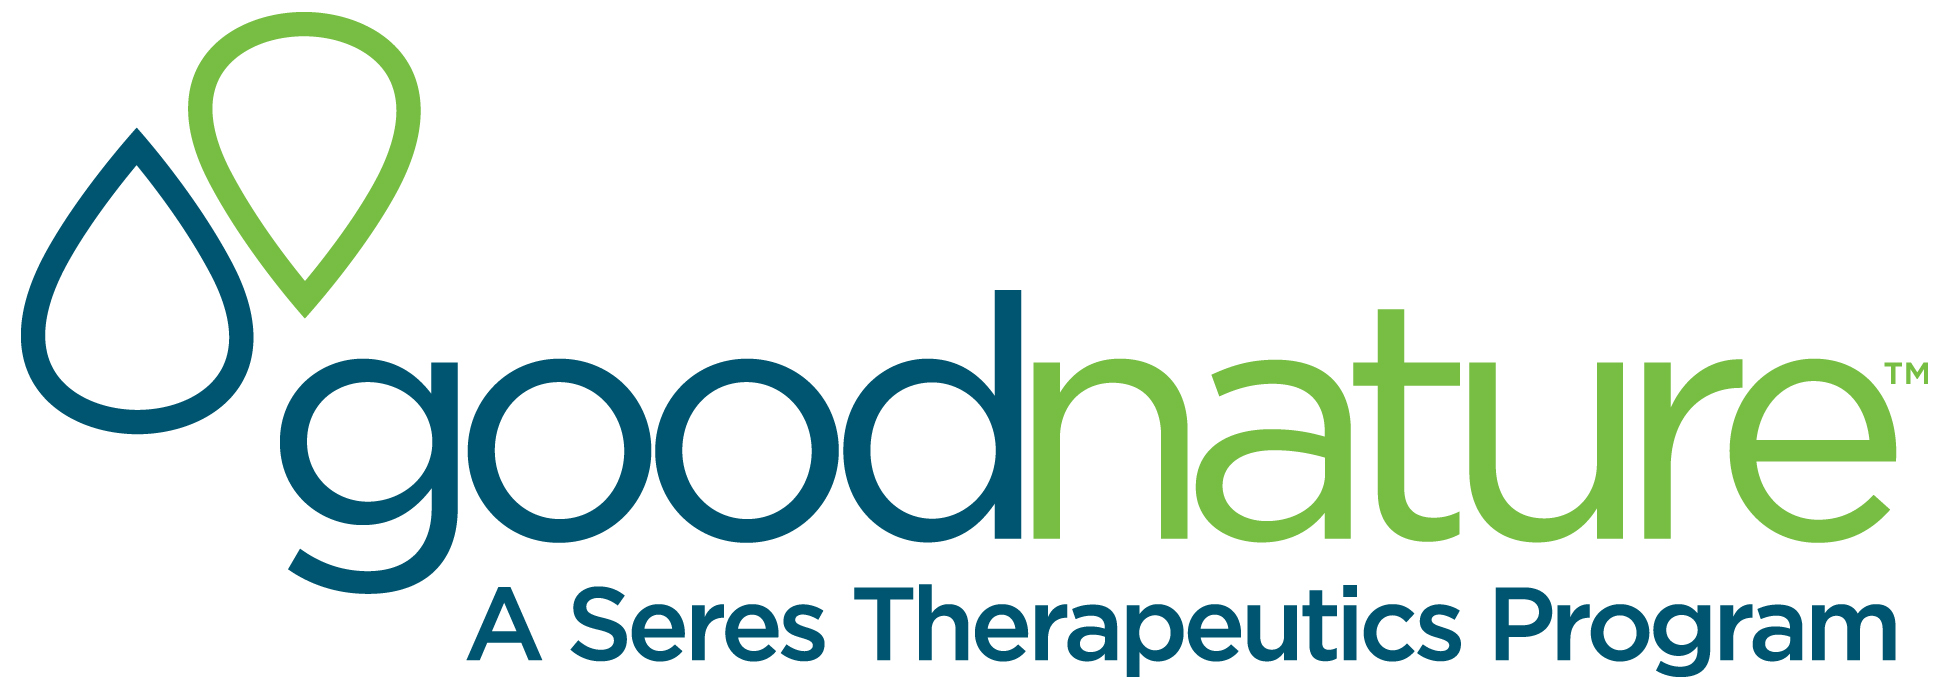 Good Nature logo and link to website